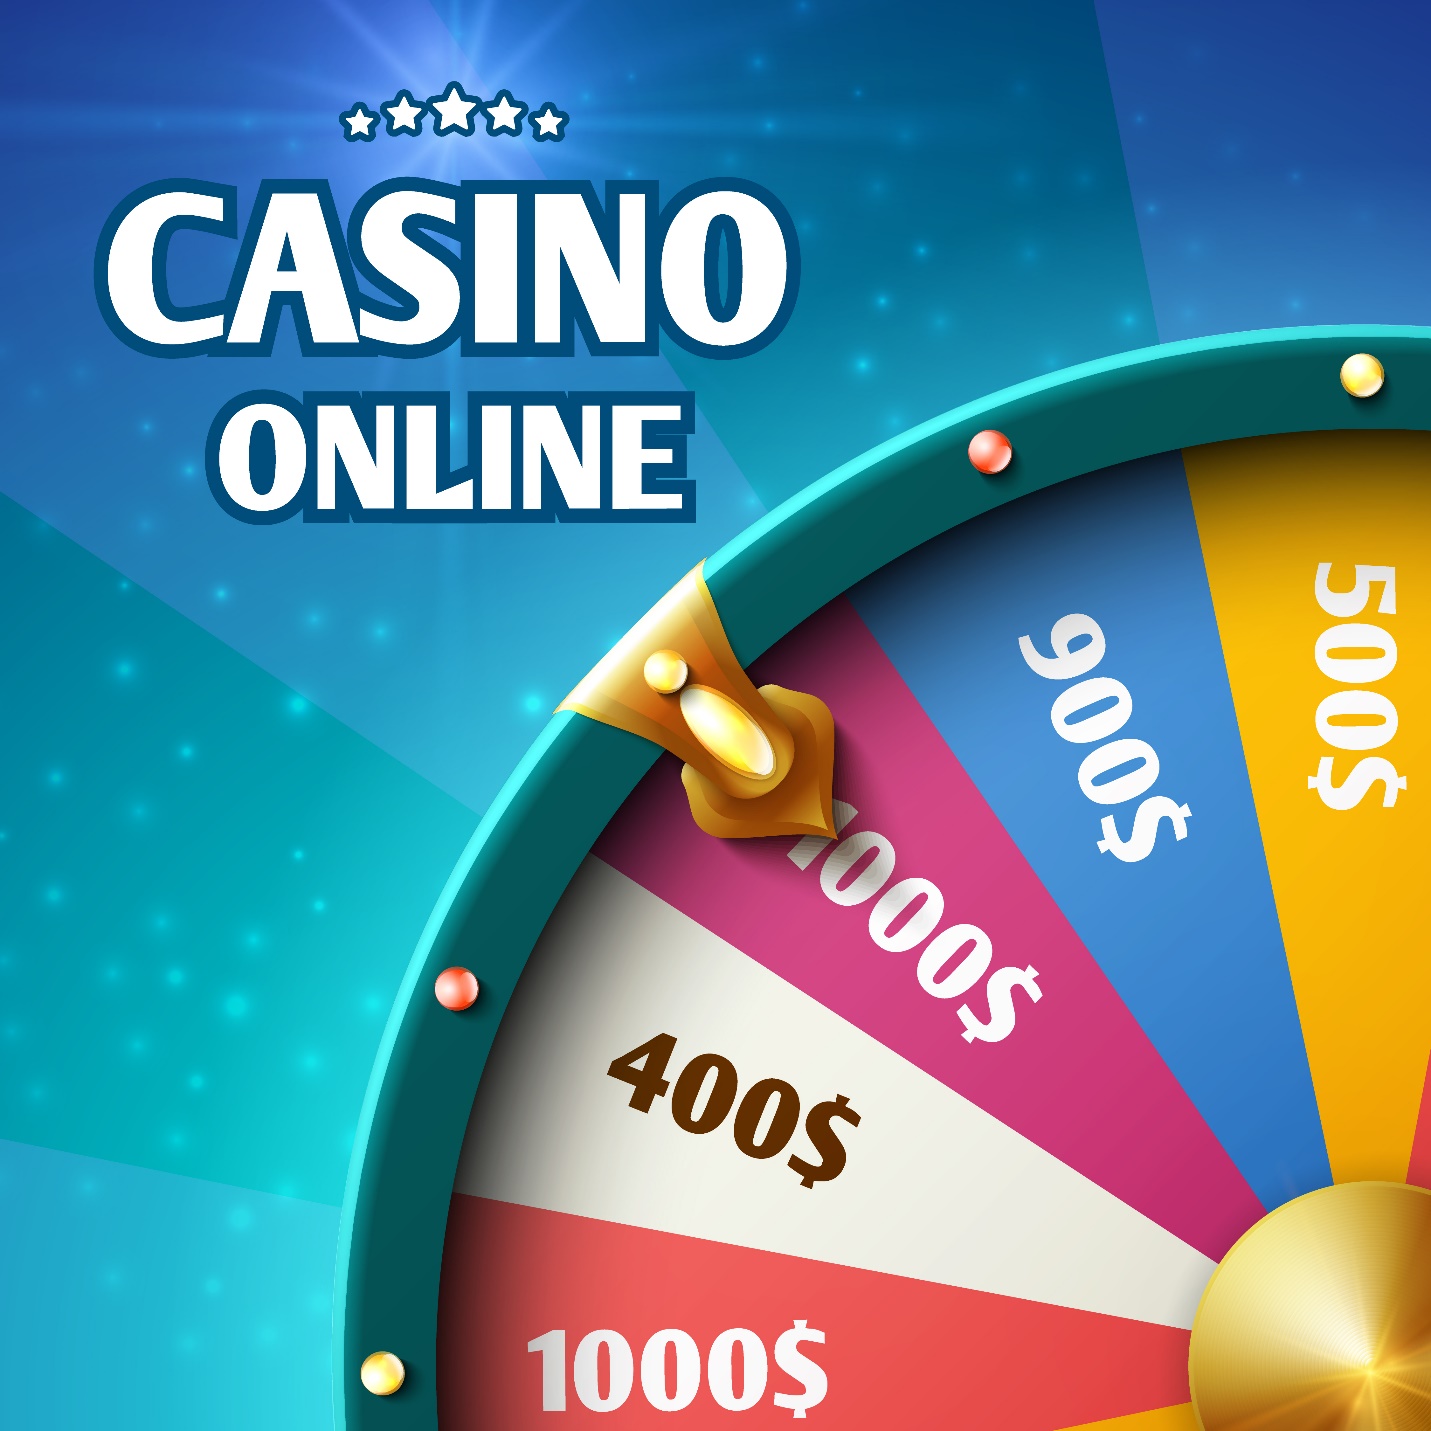 spin and win pc game